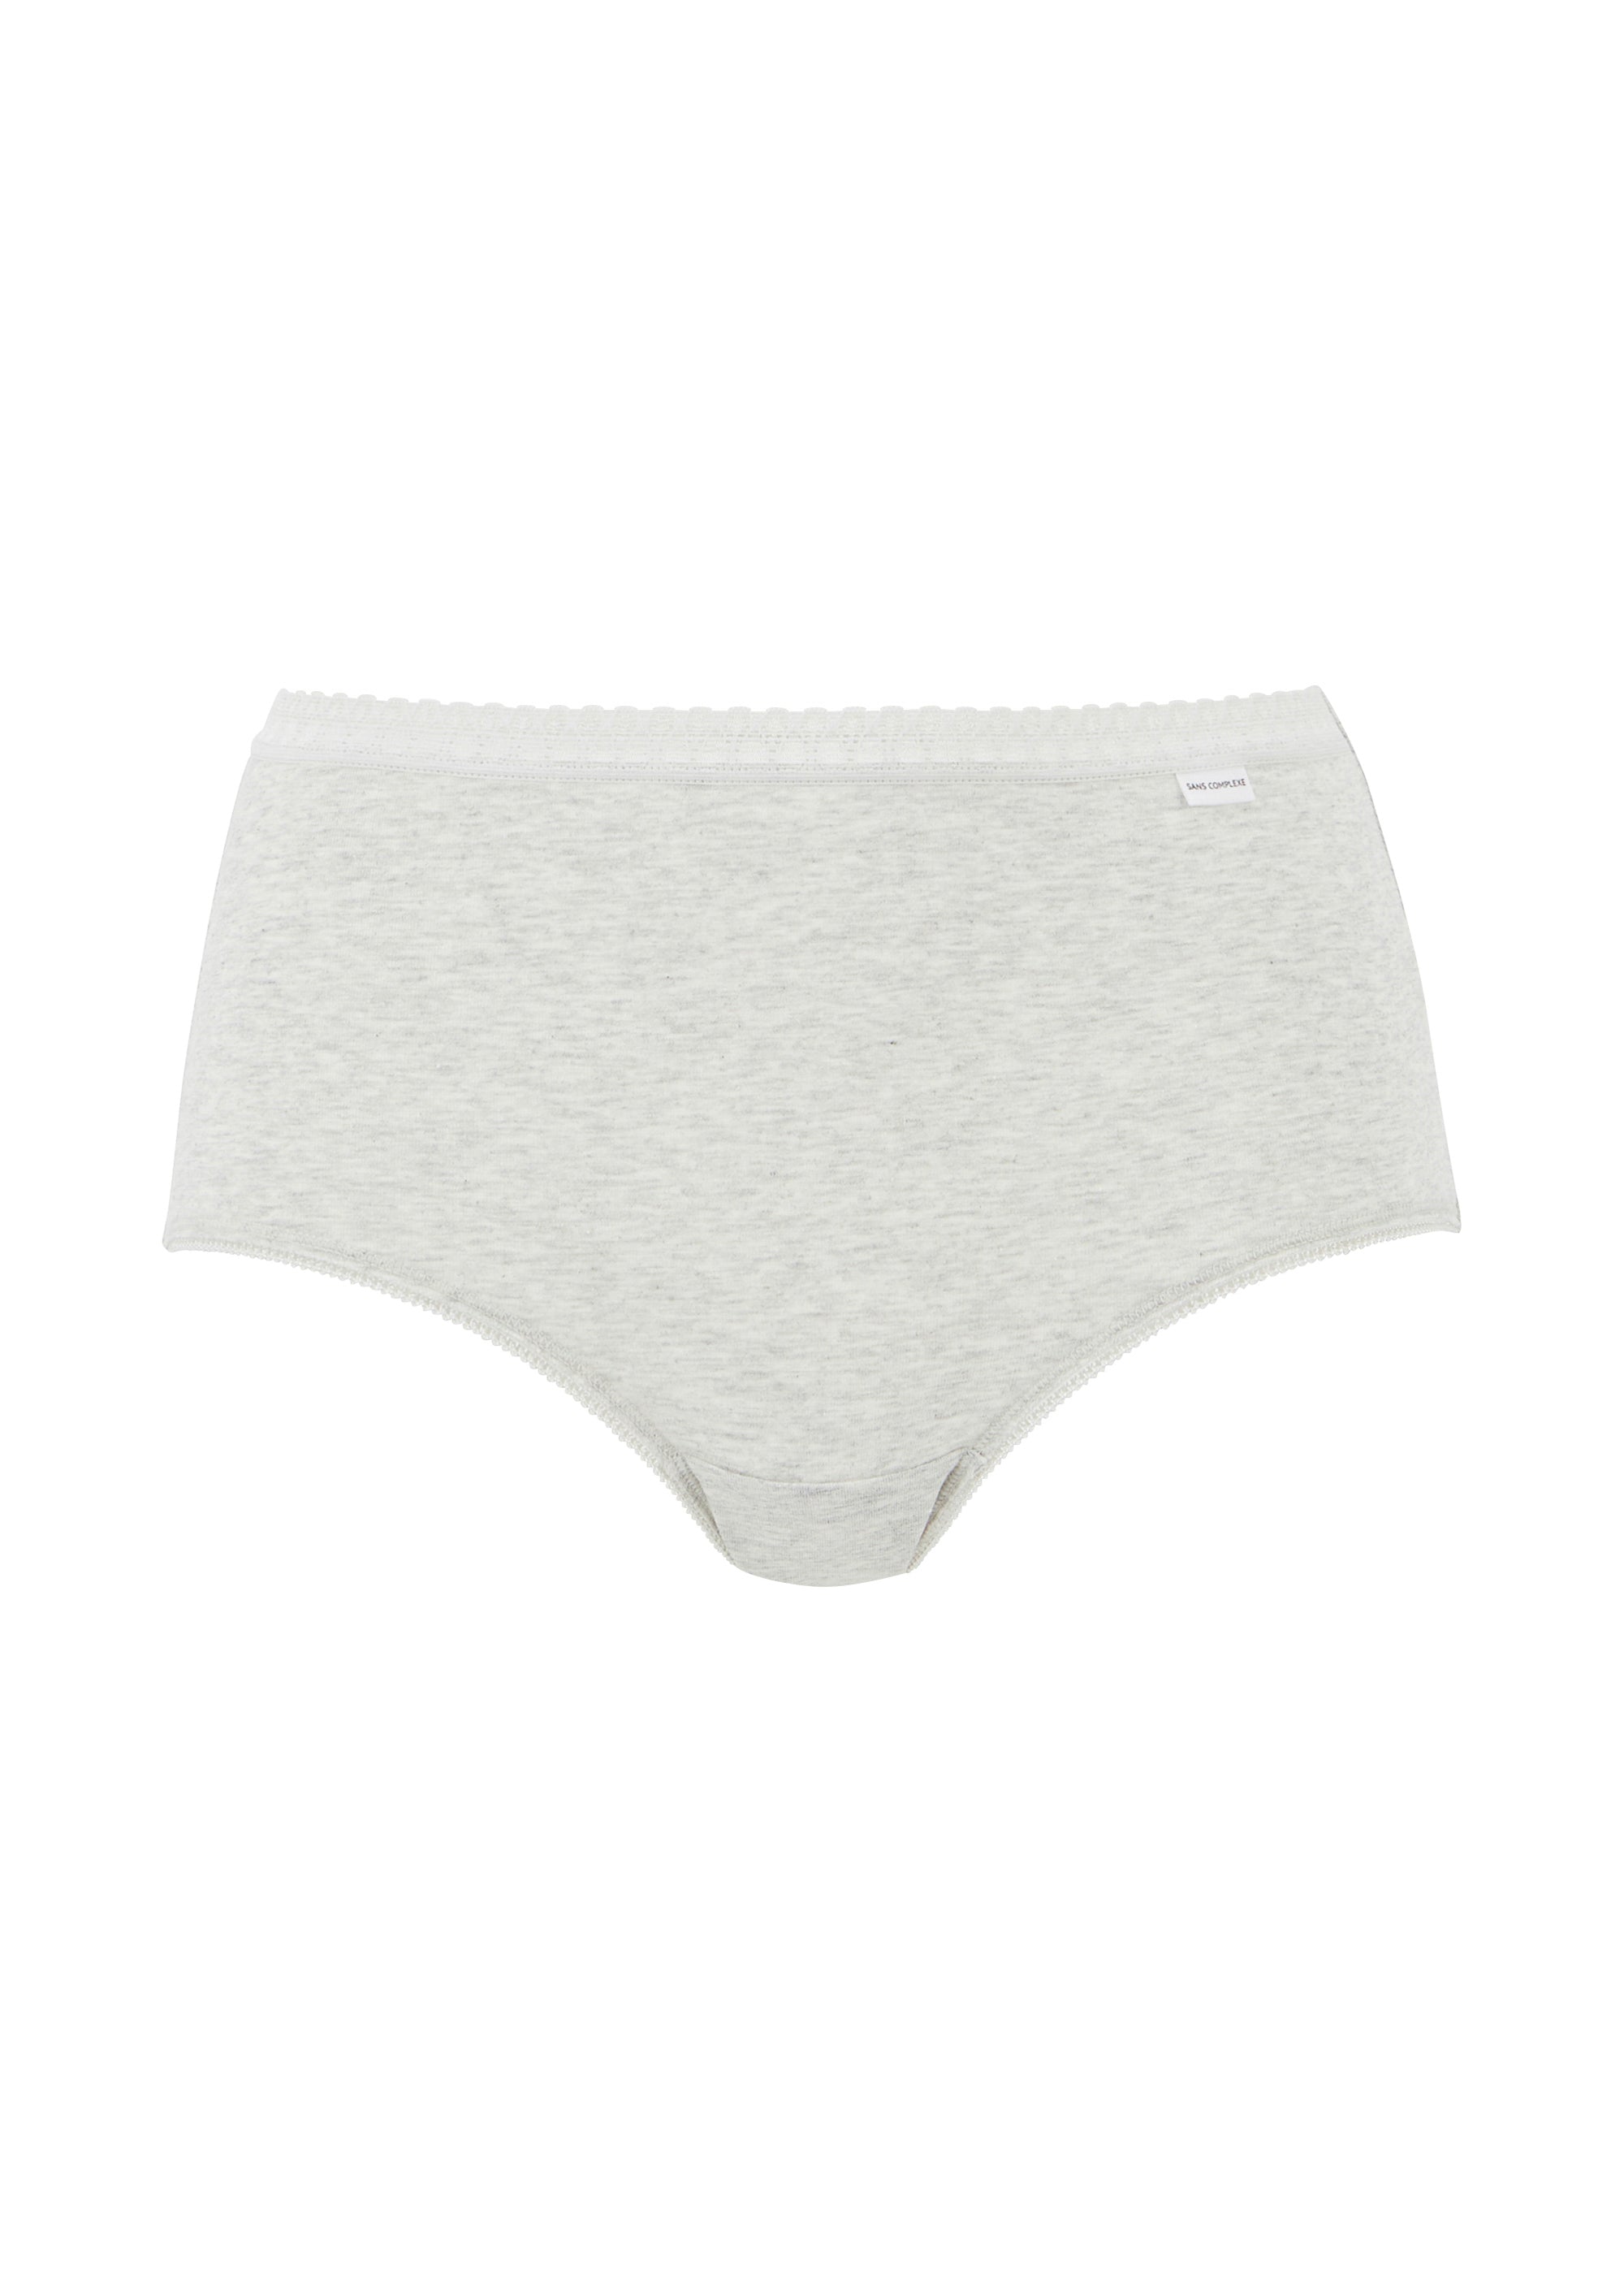 Briefs - Pack of 2 Classic Cotton Heather gray 